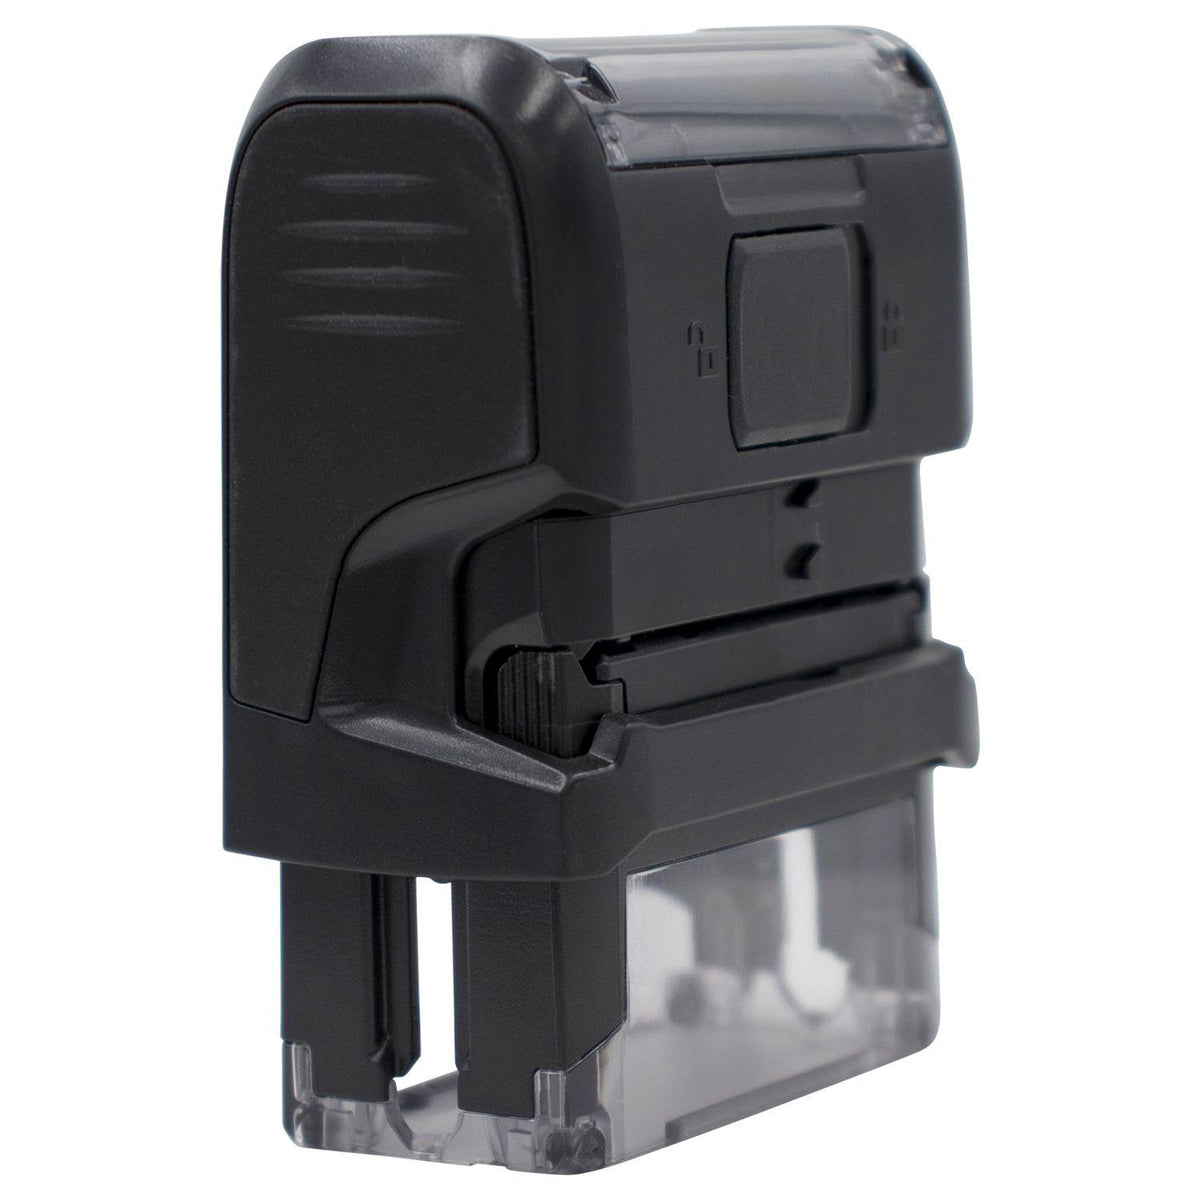 Large Self-Inking Rush with Rabbit Stamp - Engineer Seal Stamps - Brand_Trodat, Impression Size_Large, Stamp Type_Self-Inking Stamp, Type of Use_Postal &amp; Mailing, Type of Use_Shipping &amp; Receiving